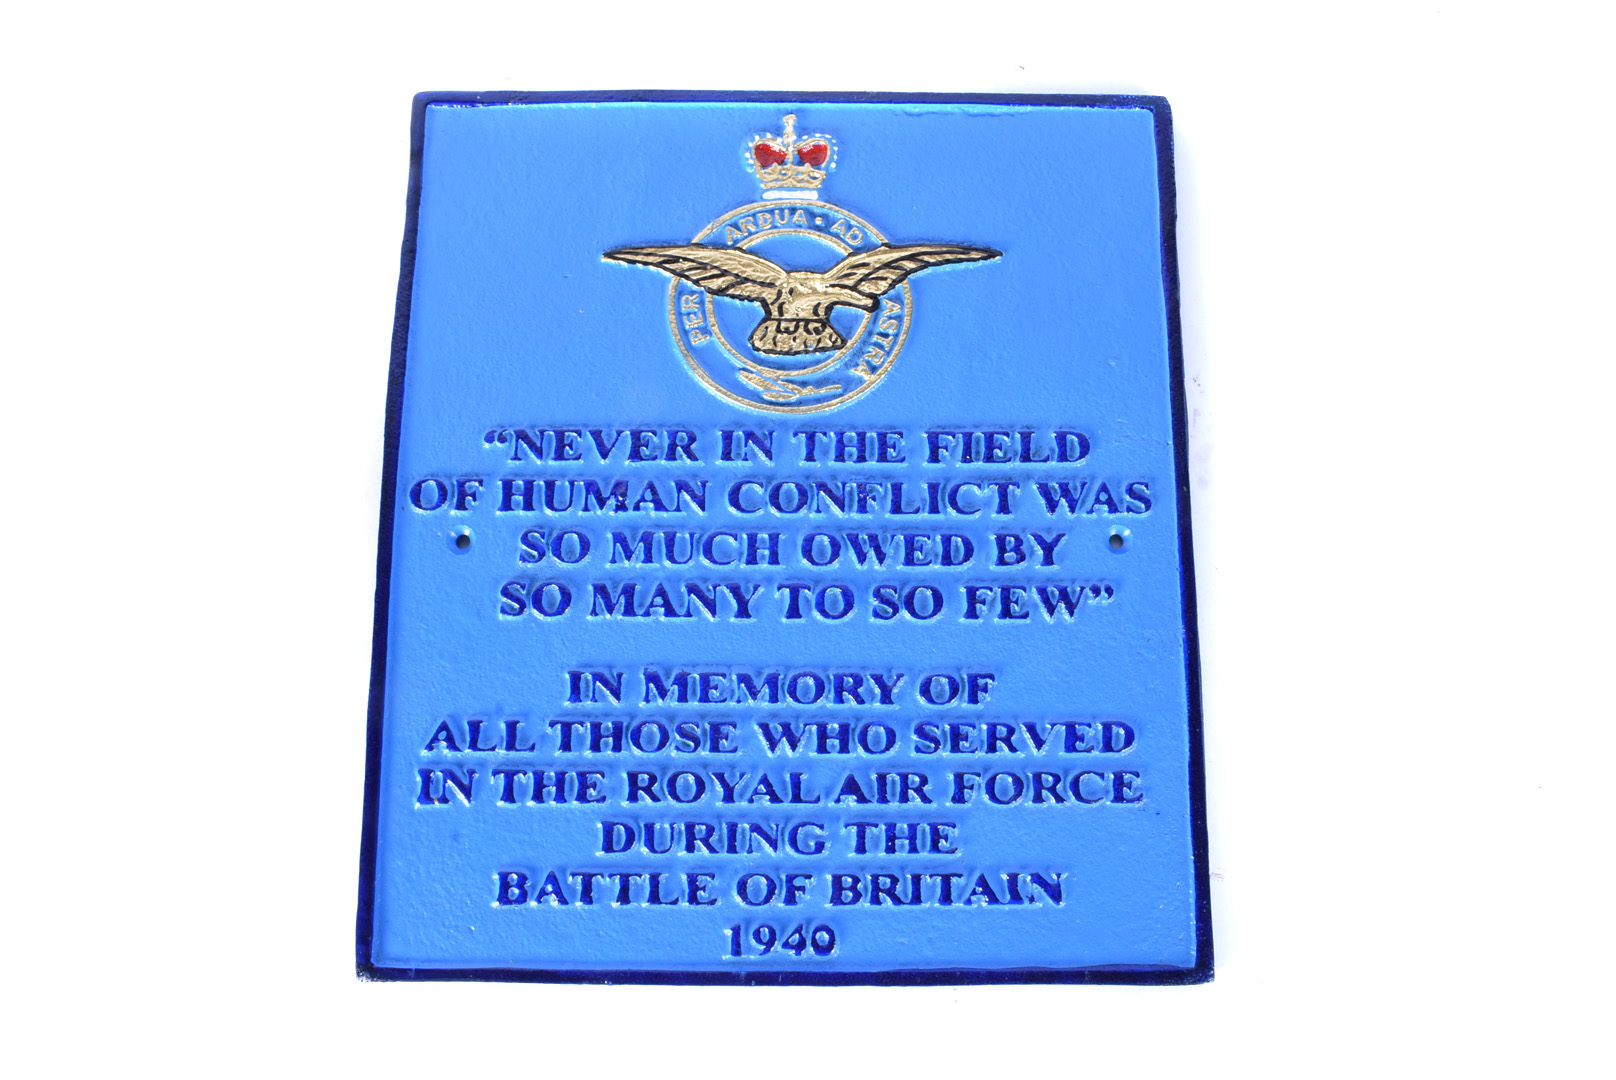 An iron Memorial Plaque for all those who served in the RAF during the Battle of Britain, the modern